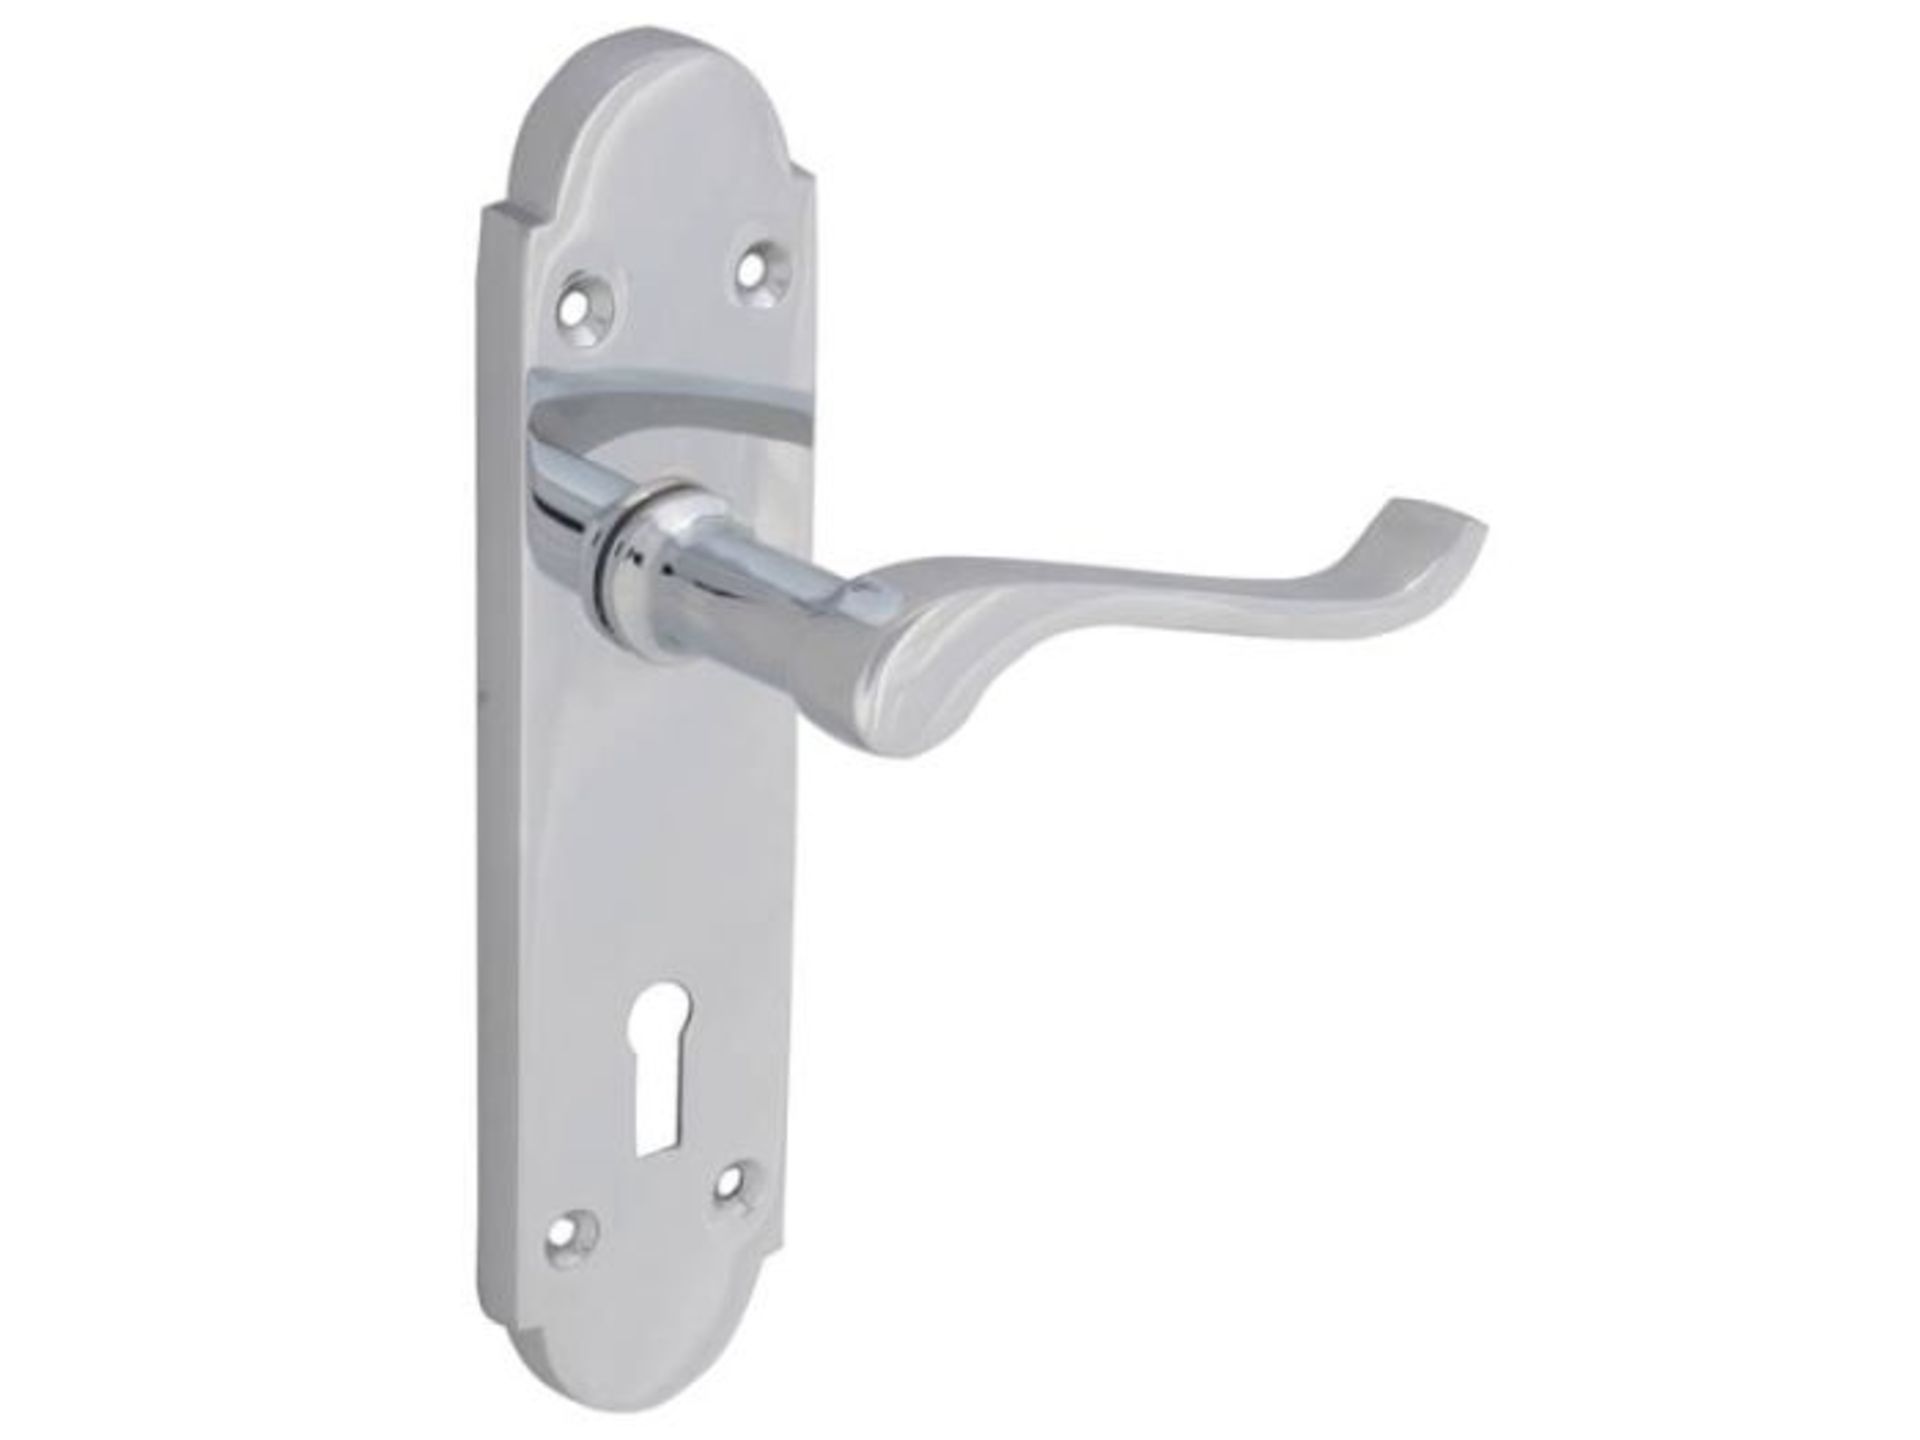 4 Sets Forge Gable Chrome Lever Lock Handles on Backplate FGEHLOCGABCH RRP £14.99 per set - Image 2 of 2